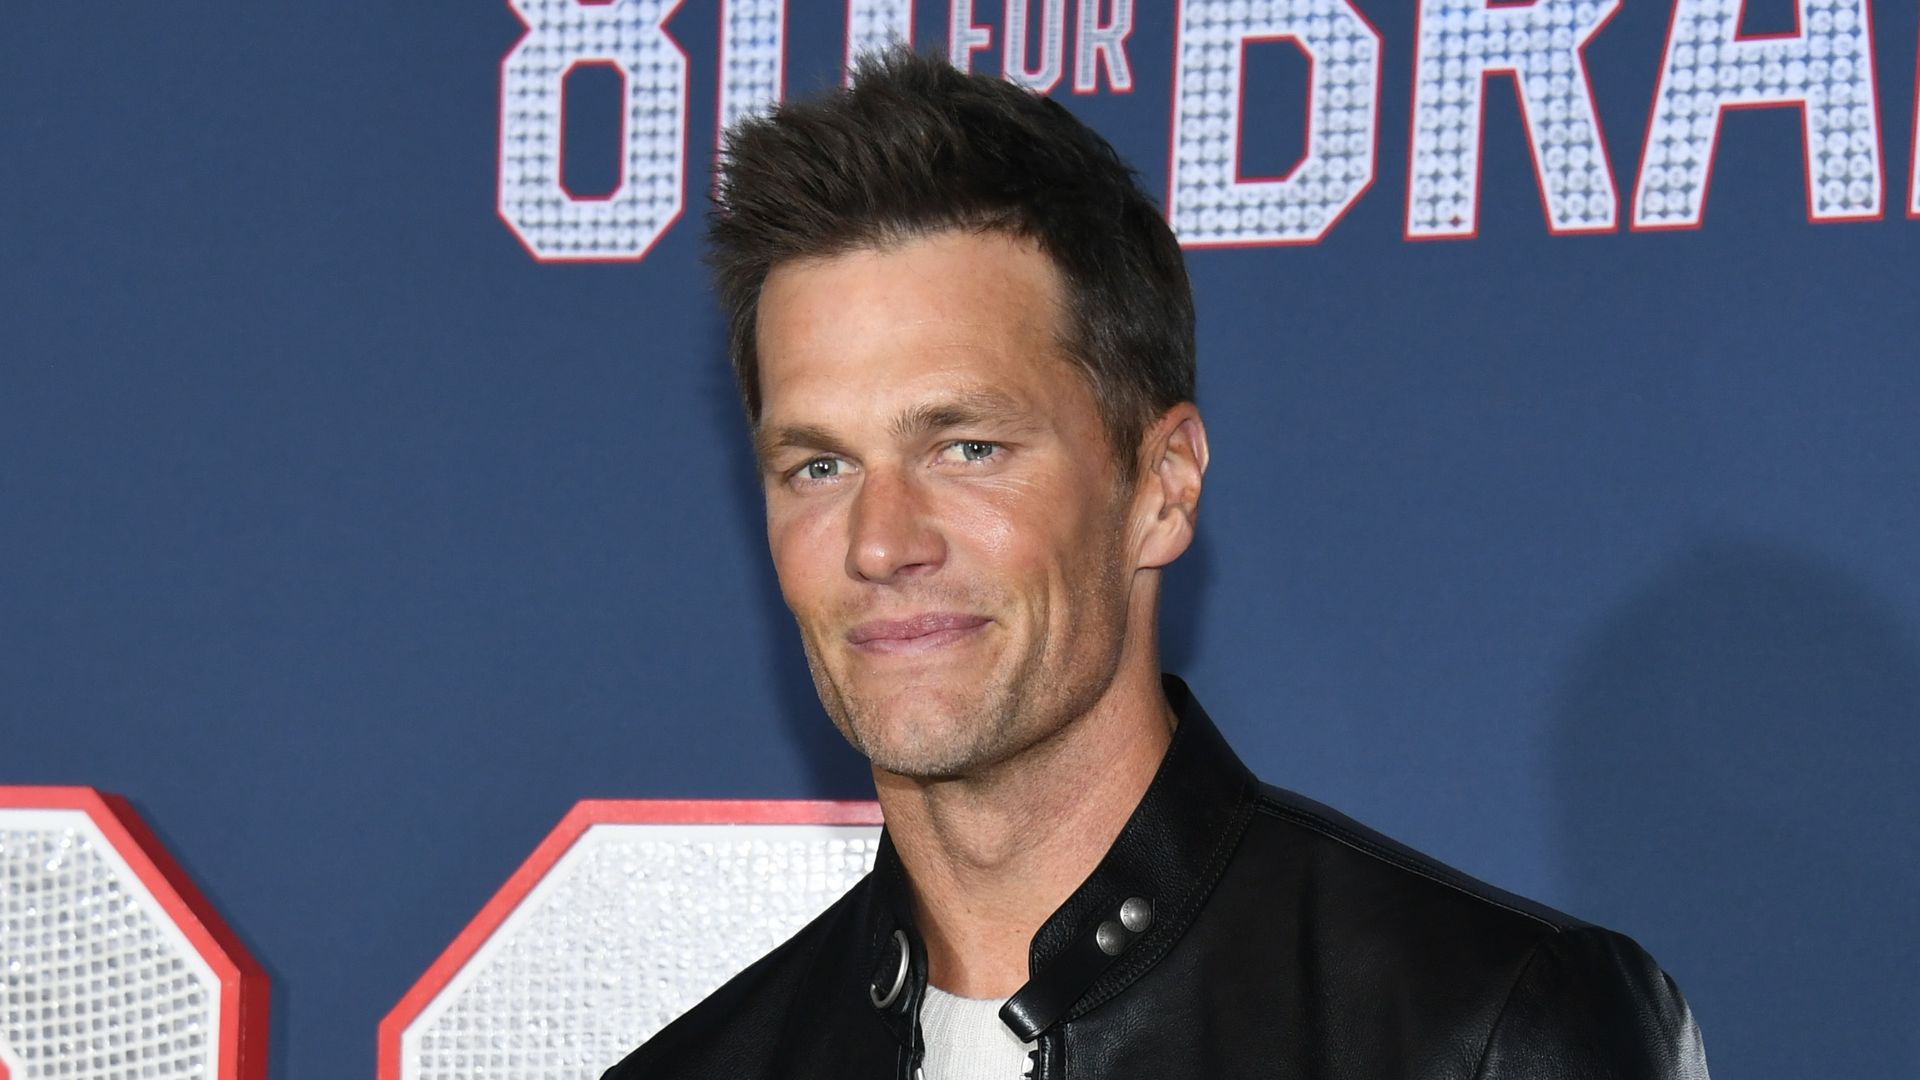 Tom Brady attends Los Angeles Premiere Screening Of Paramount Pictures' "80 For Brady" at Regency Village Theatre on January 31, 2023 in Los Angeles, California